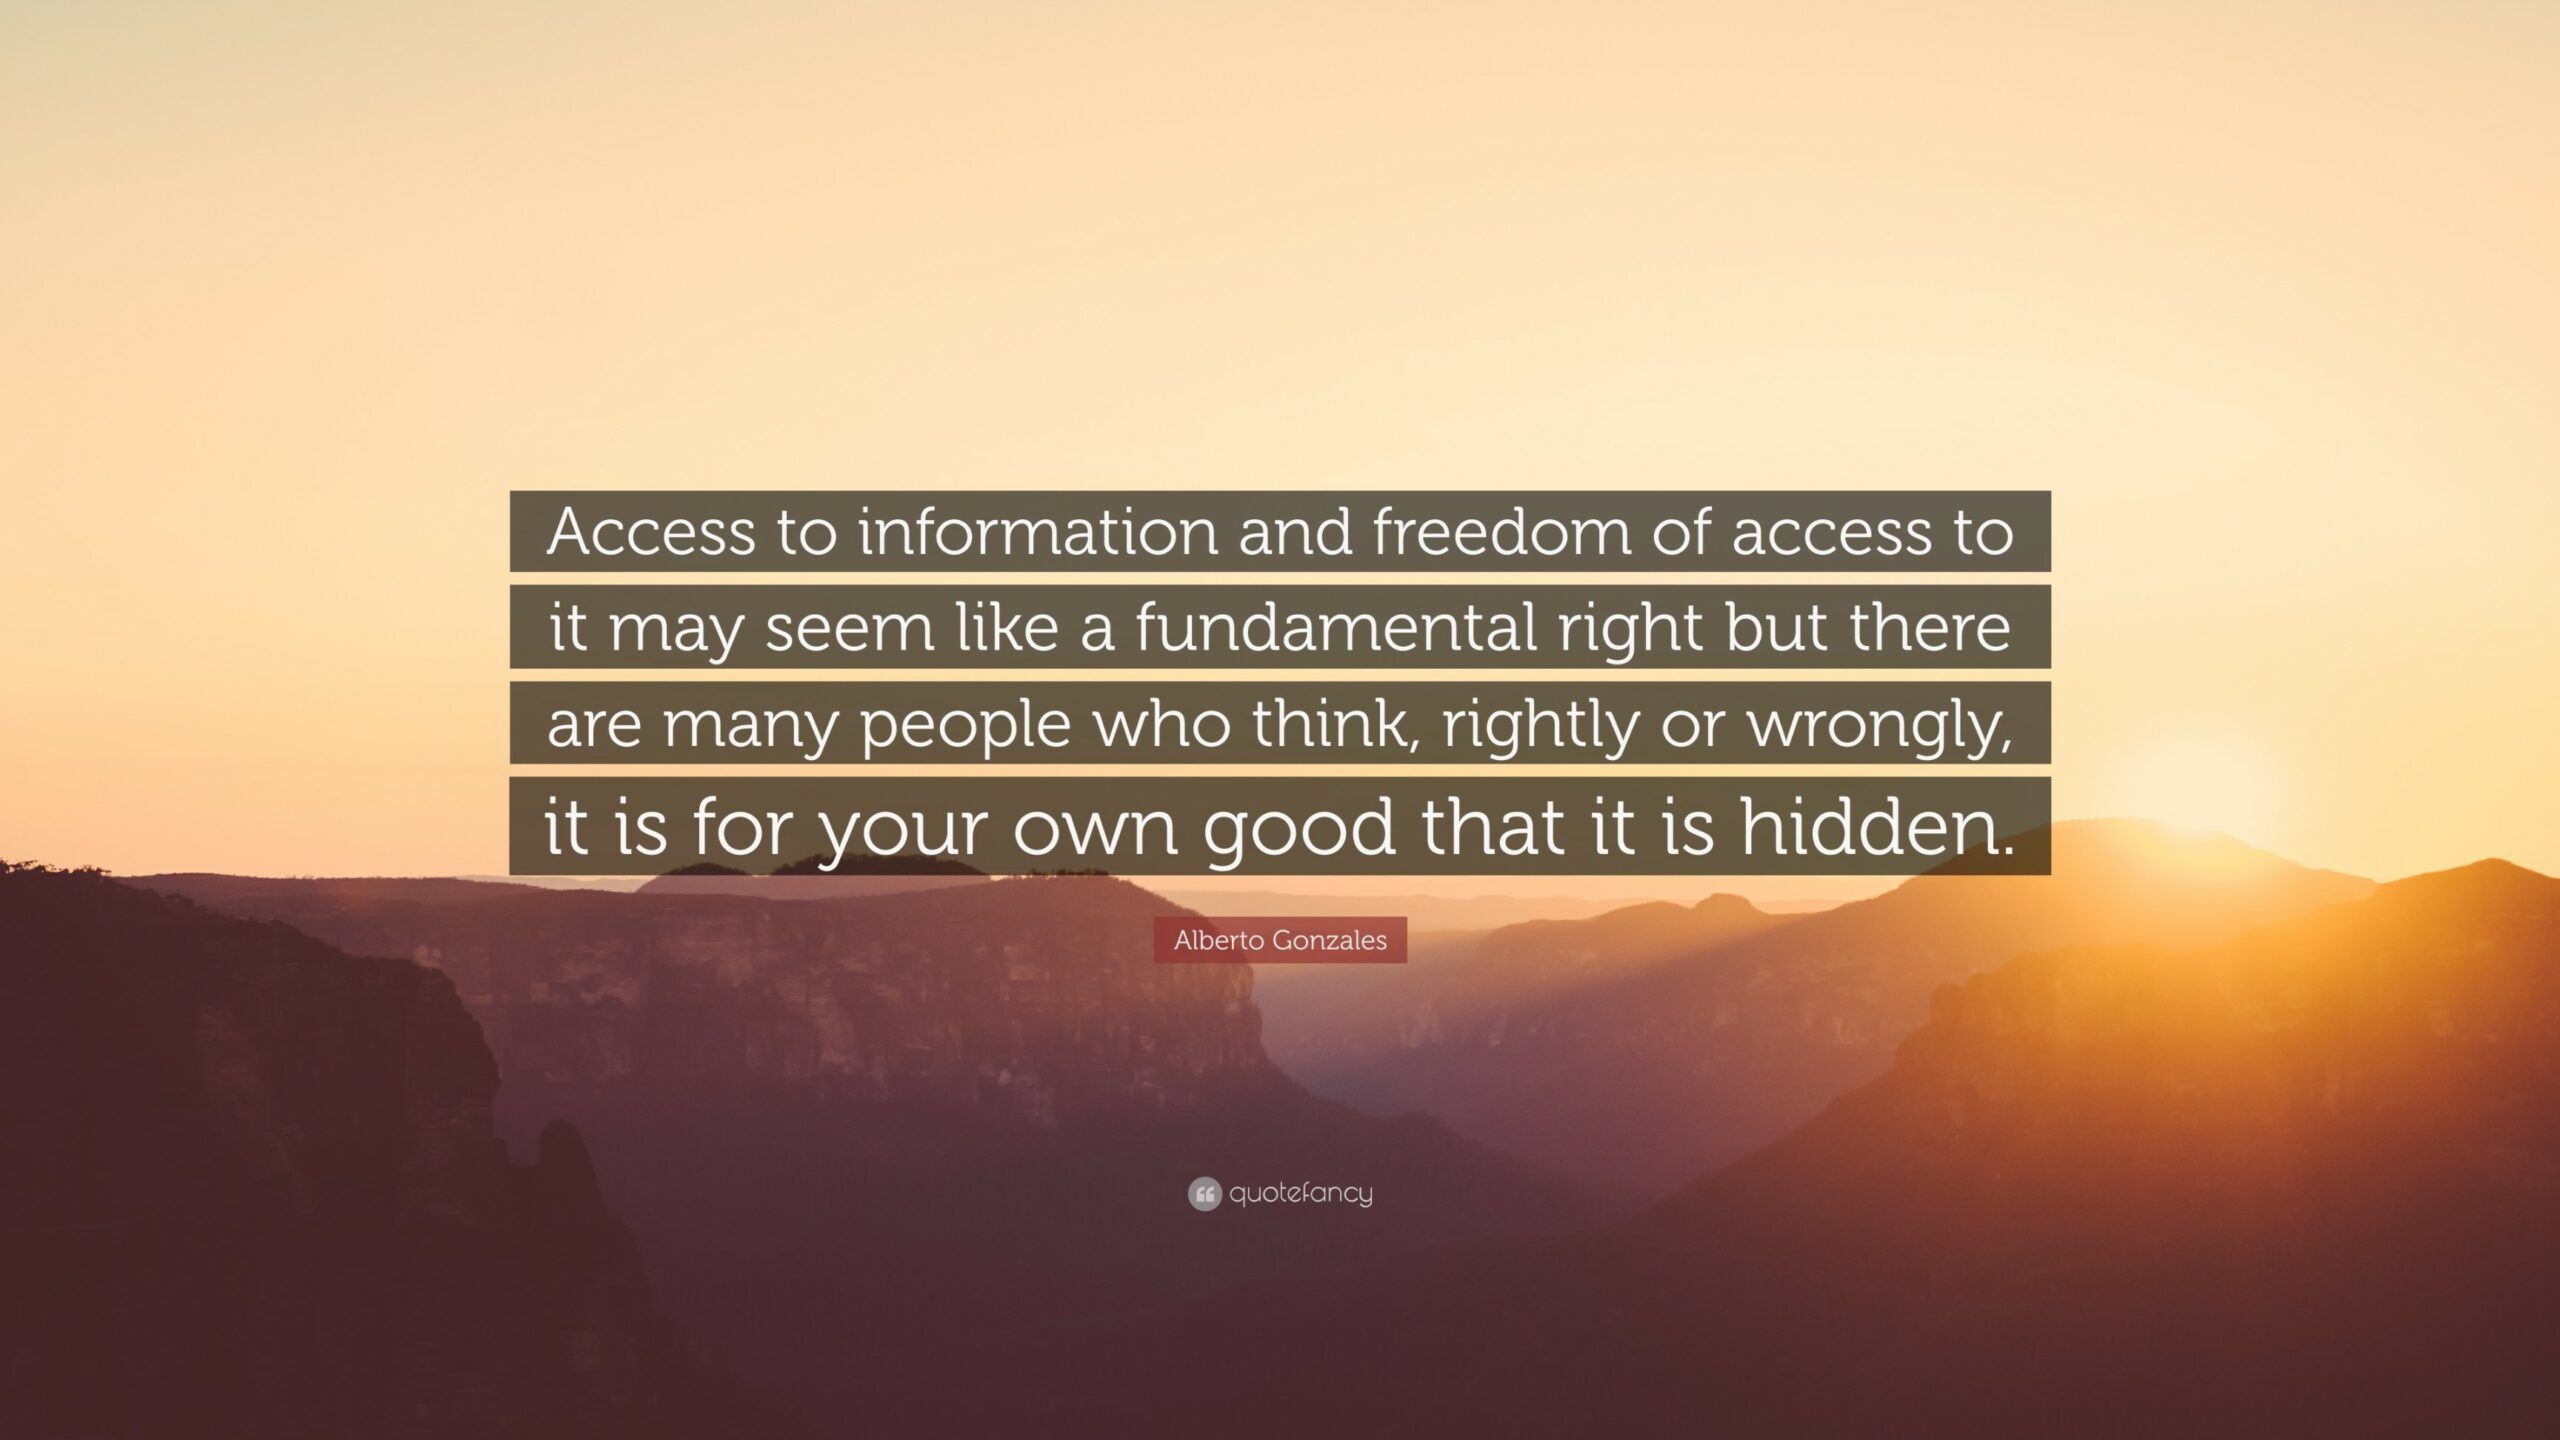 Alberto Gonzales Quote: “Access to information and freedom of